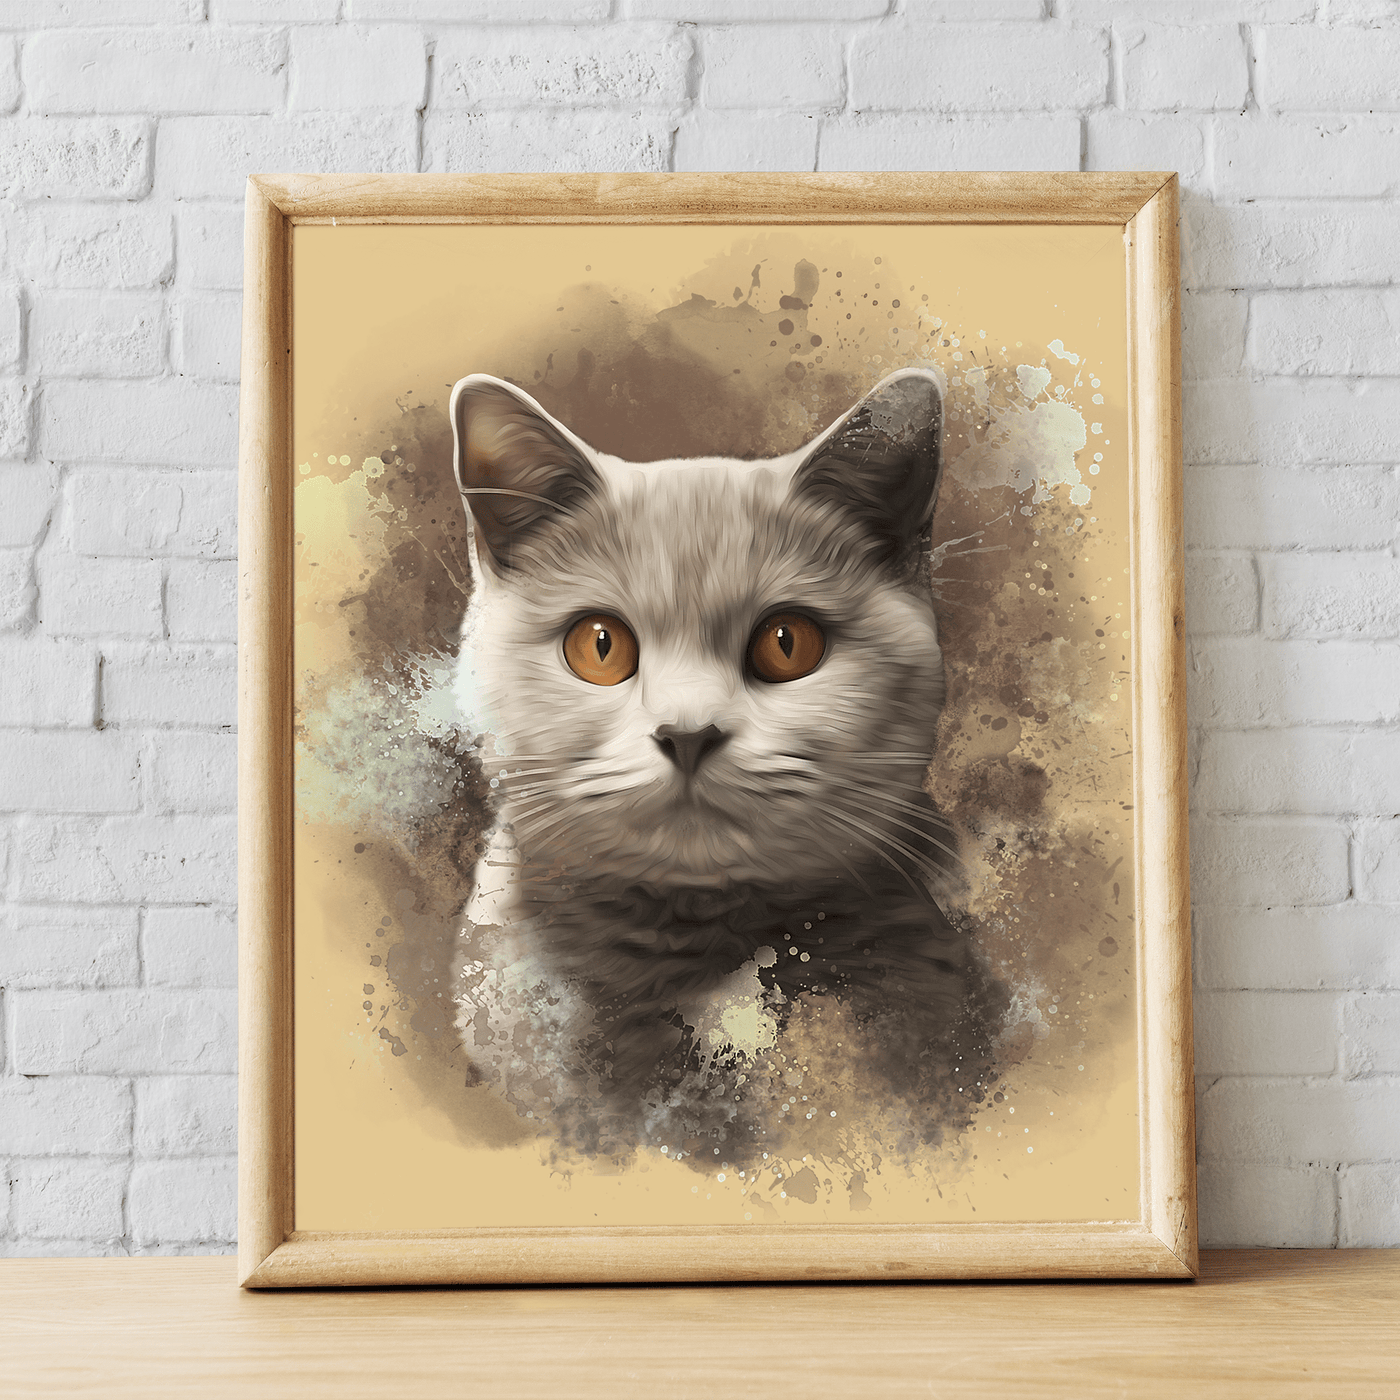 cat paintings on canvas of a gray furred cat